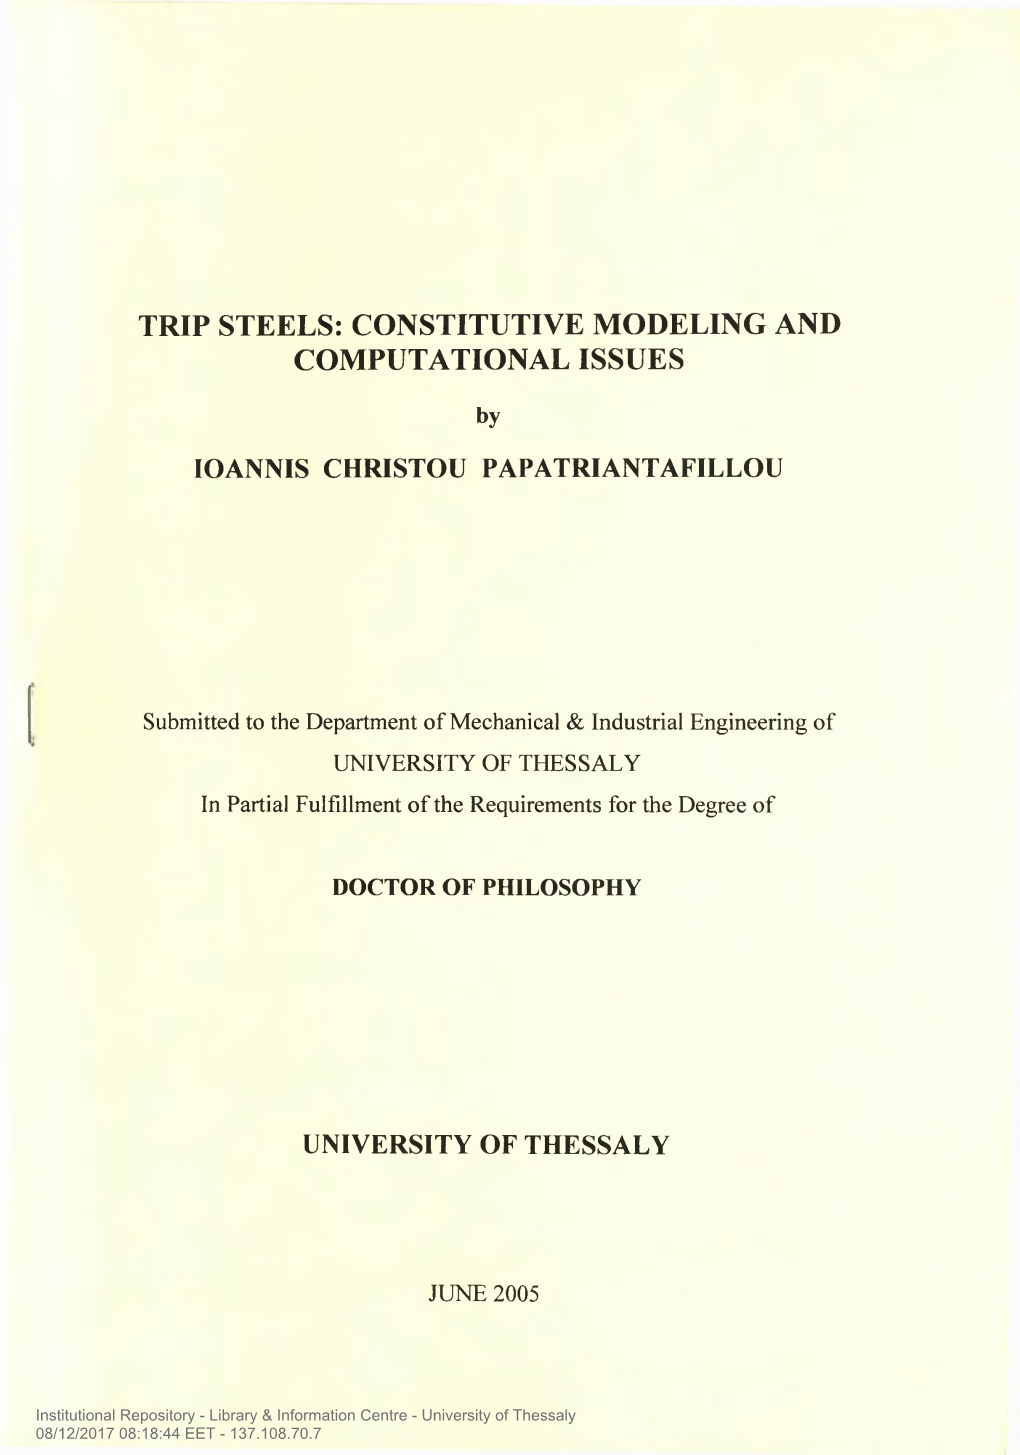 Trip Steels: Constitutive Modeling and Computational Issues